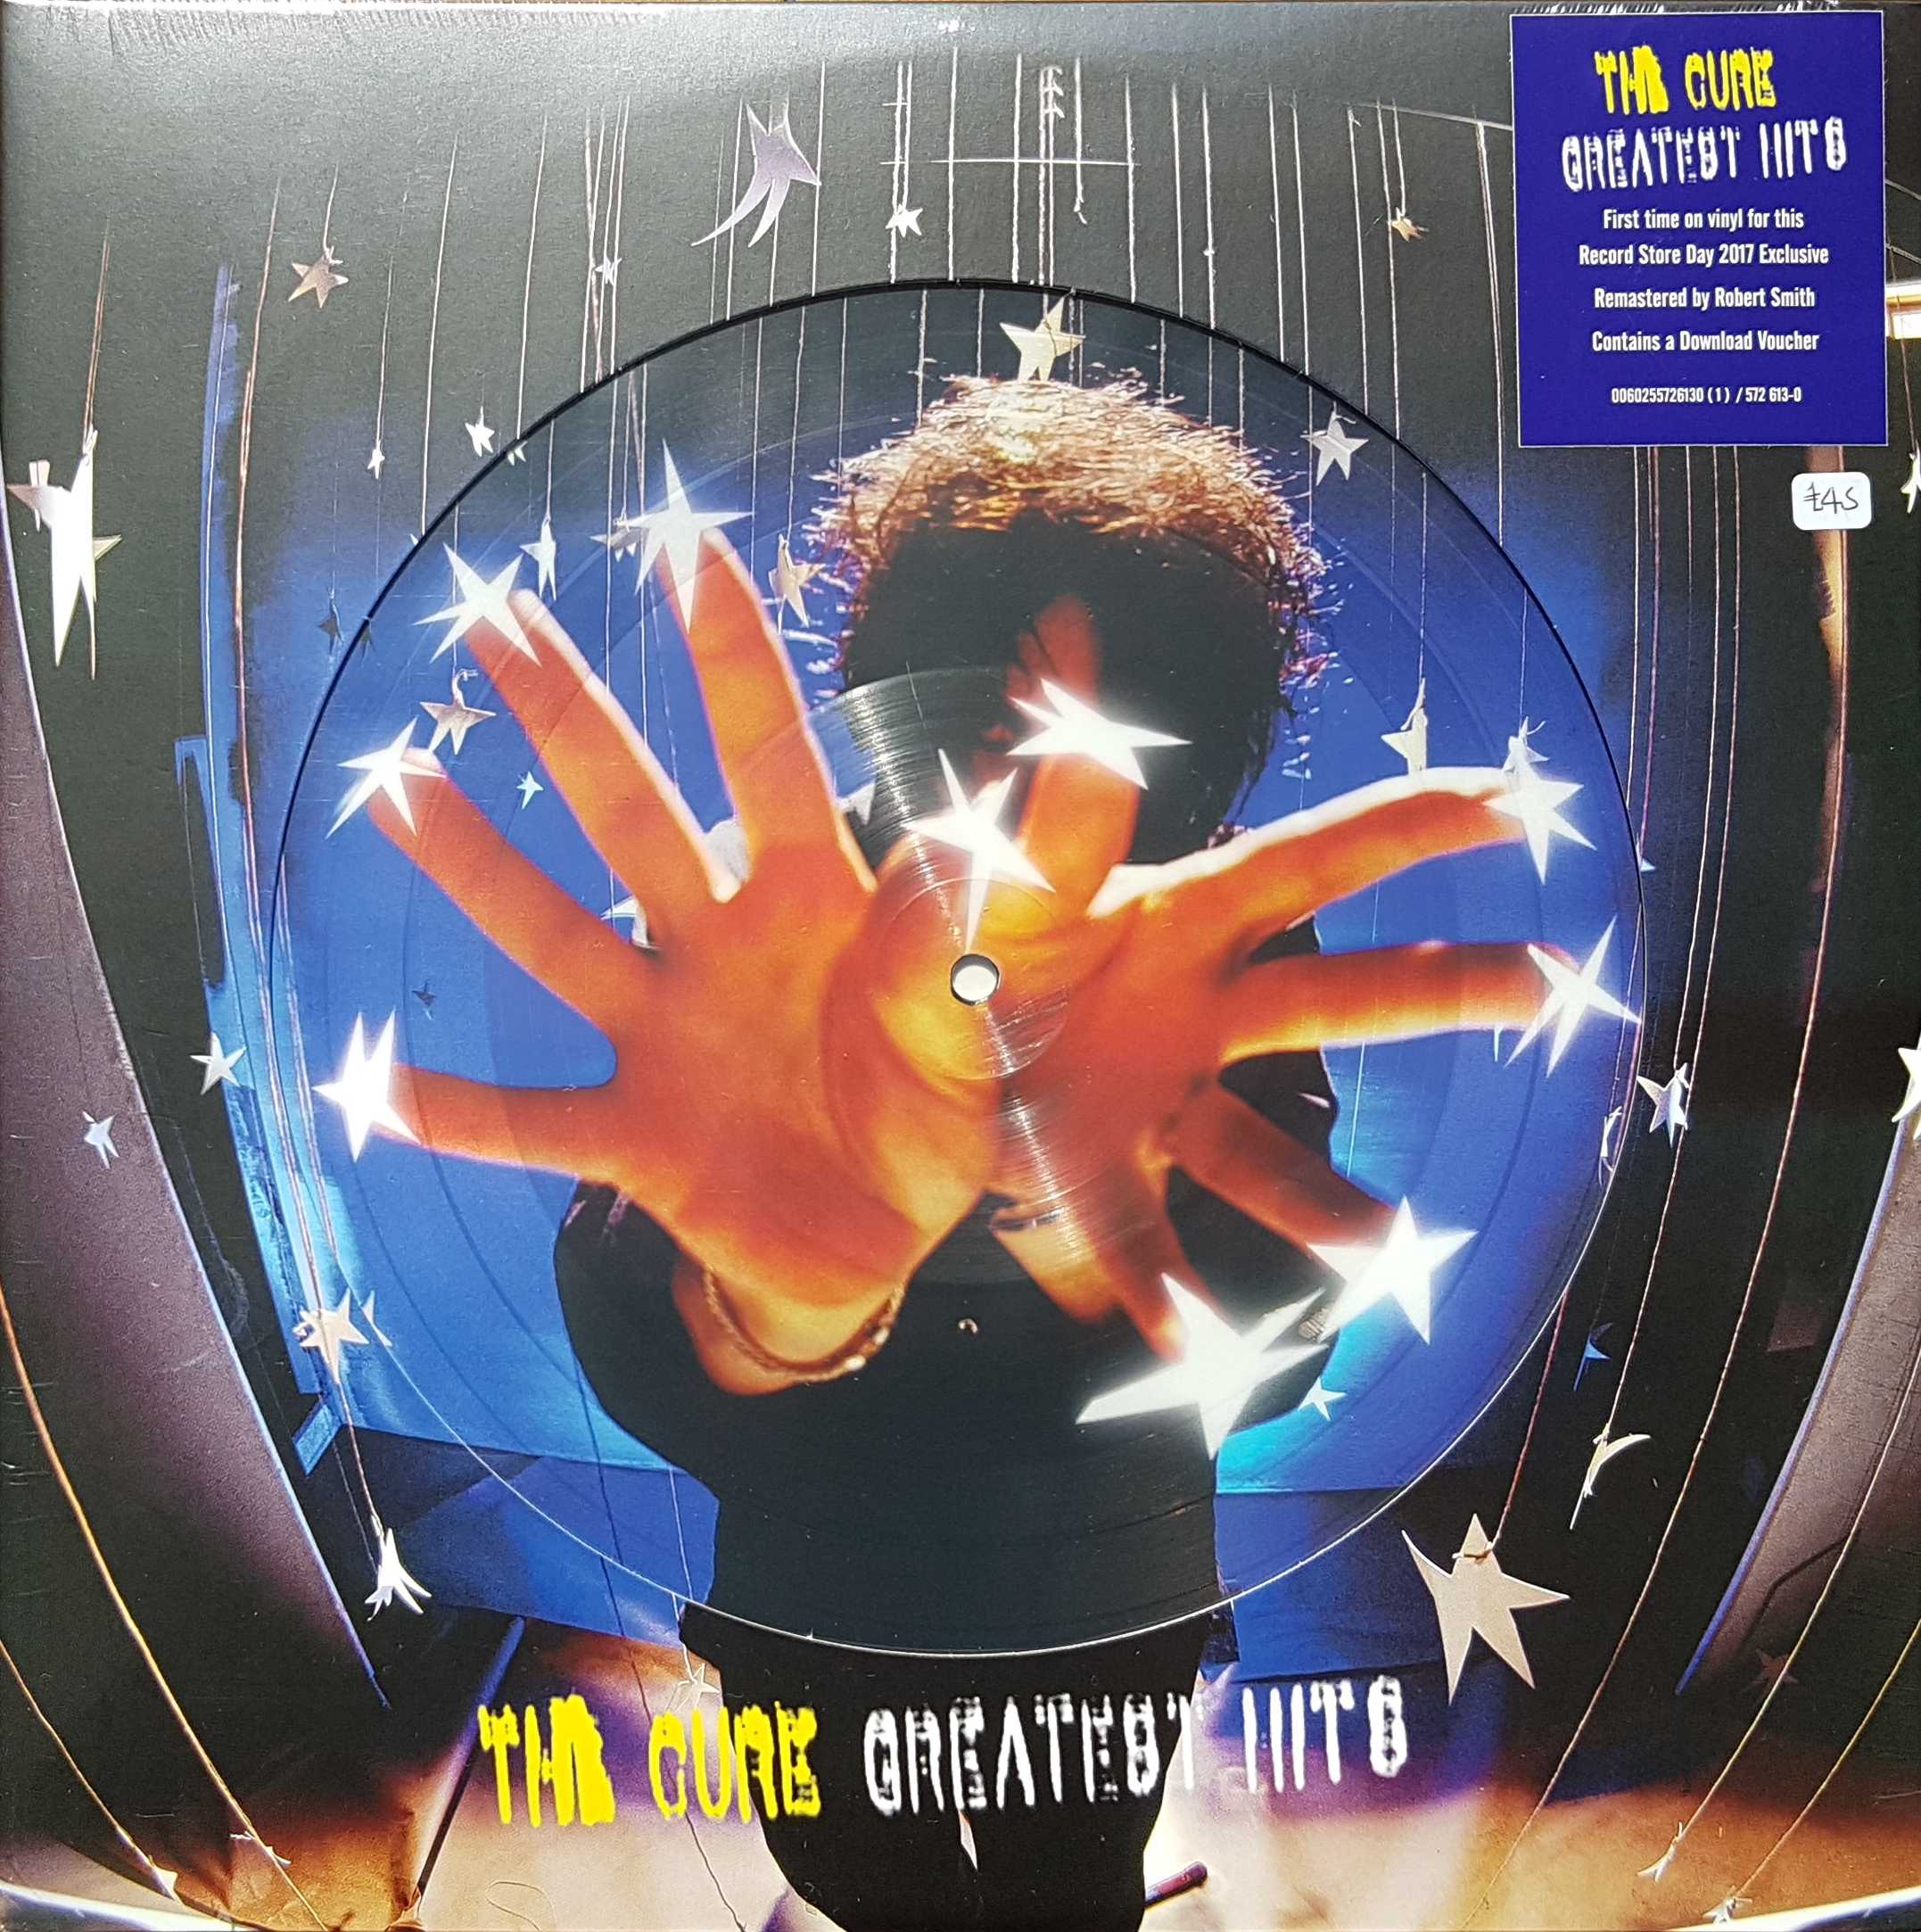 Picture of 572613 - 0 Greatest hits - Limited edition picture discs - Record Store Day 2017 by artist The Cure  from The Stranglers albums